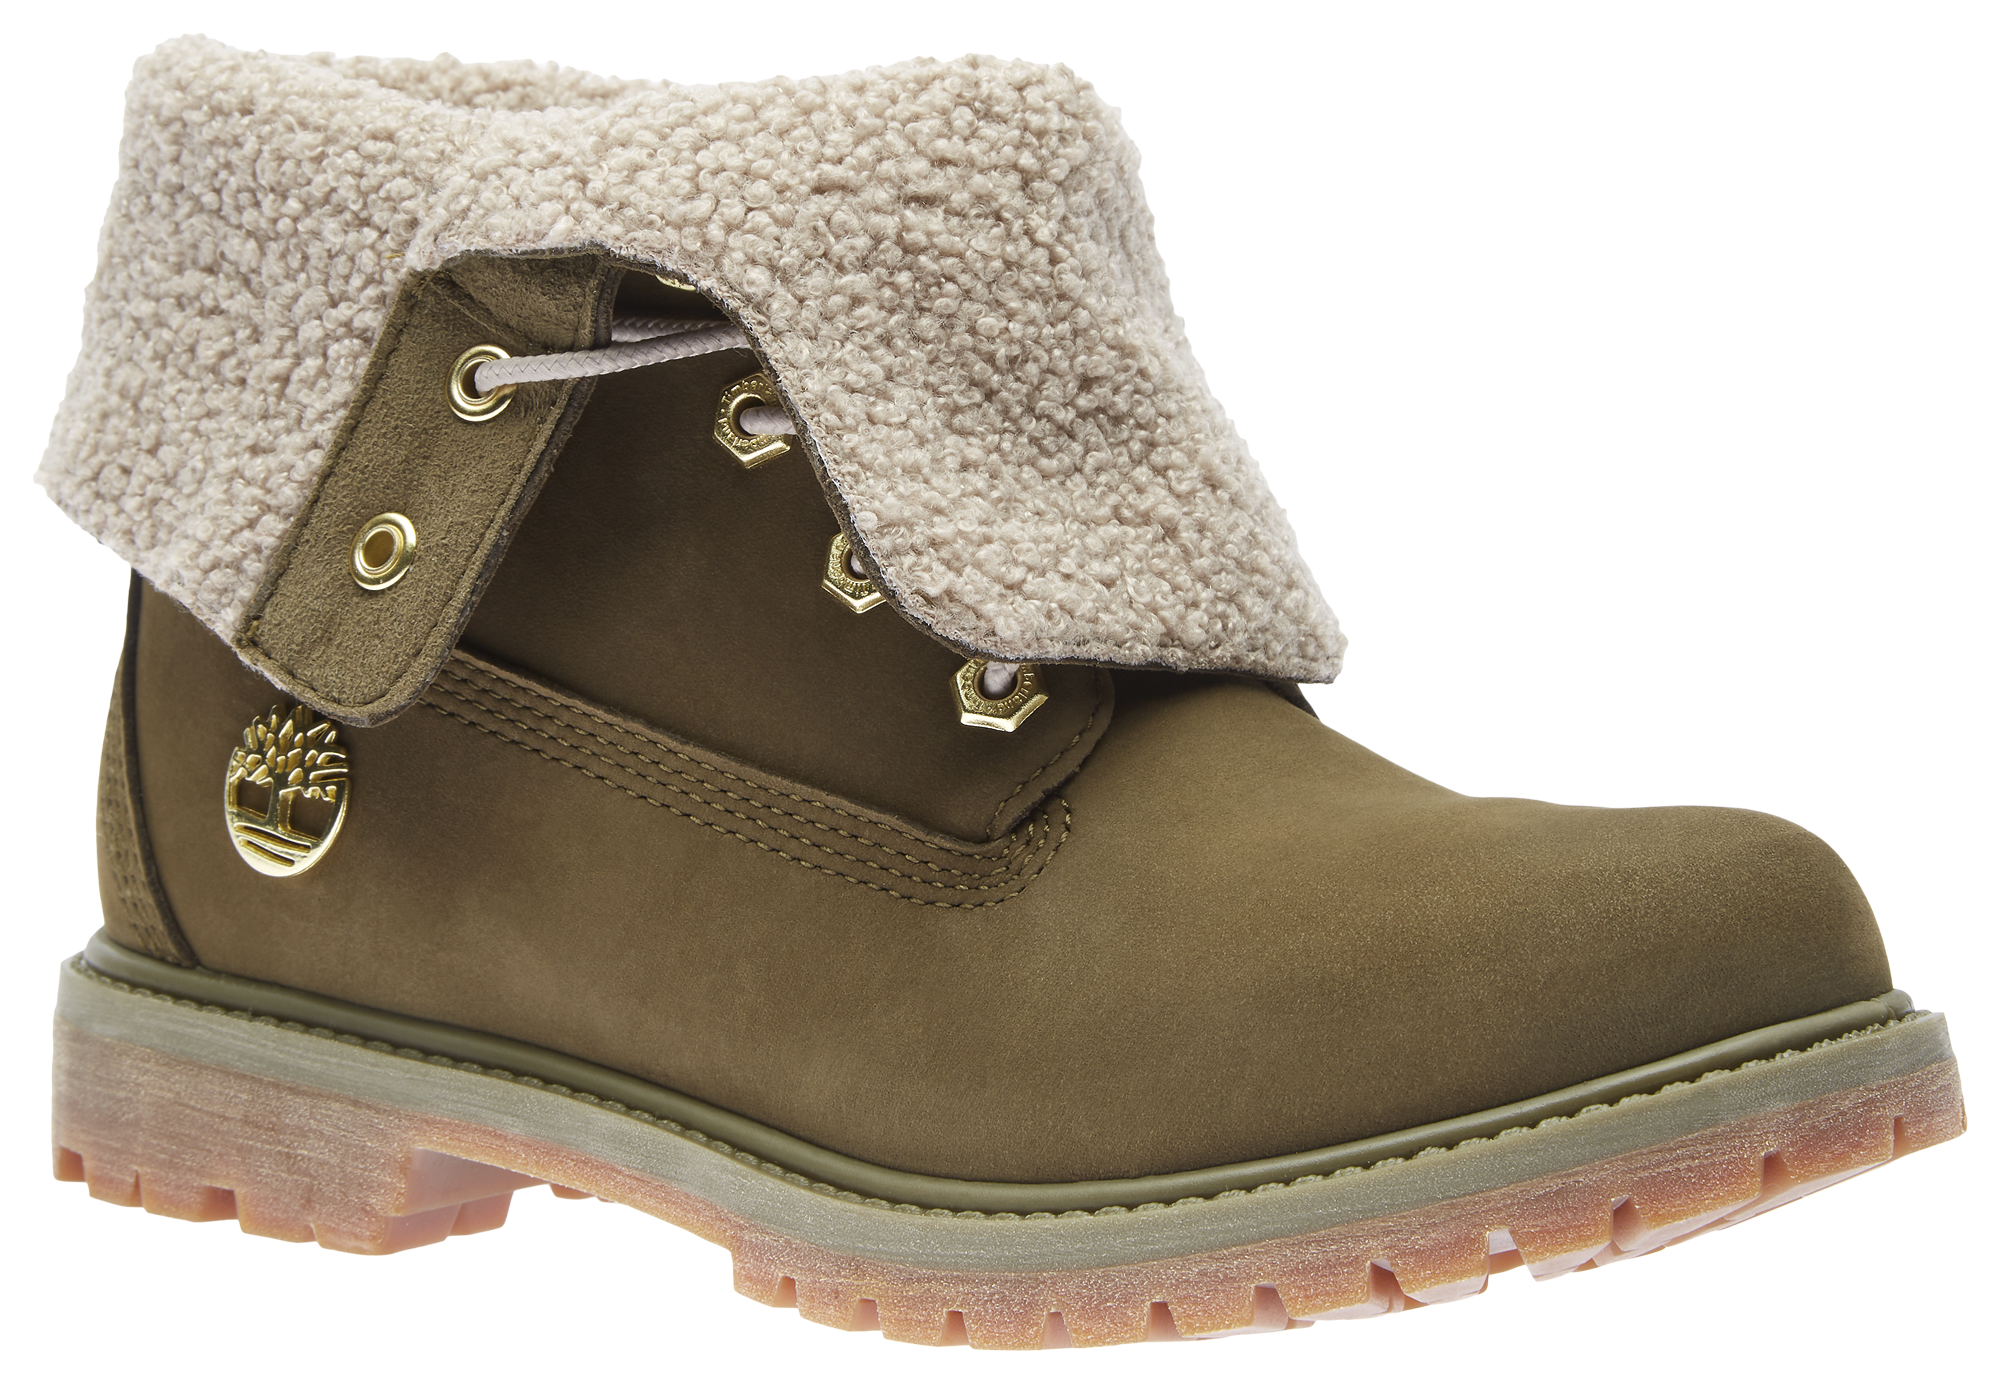 Timberland Teddy Fleece Fold Down Boots | Champs Sports Canada